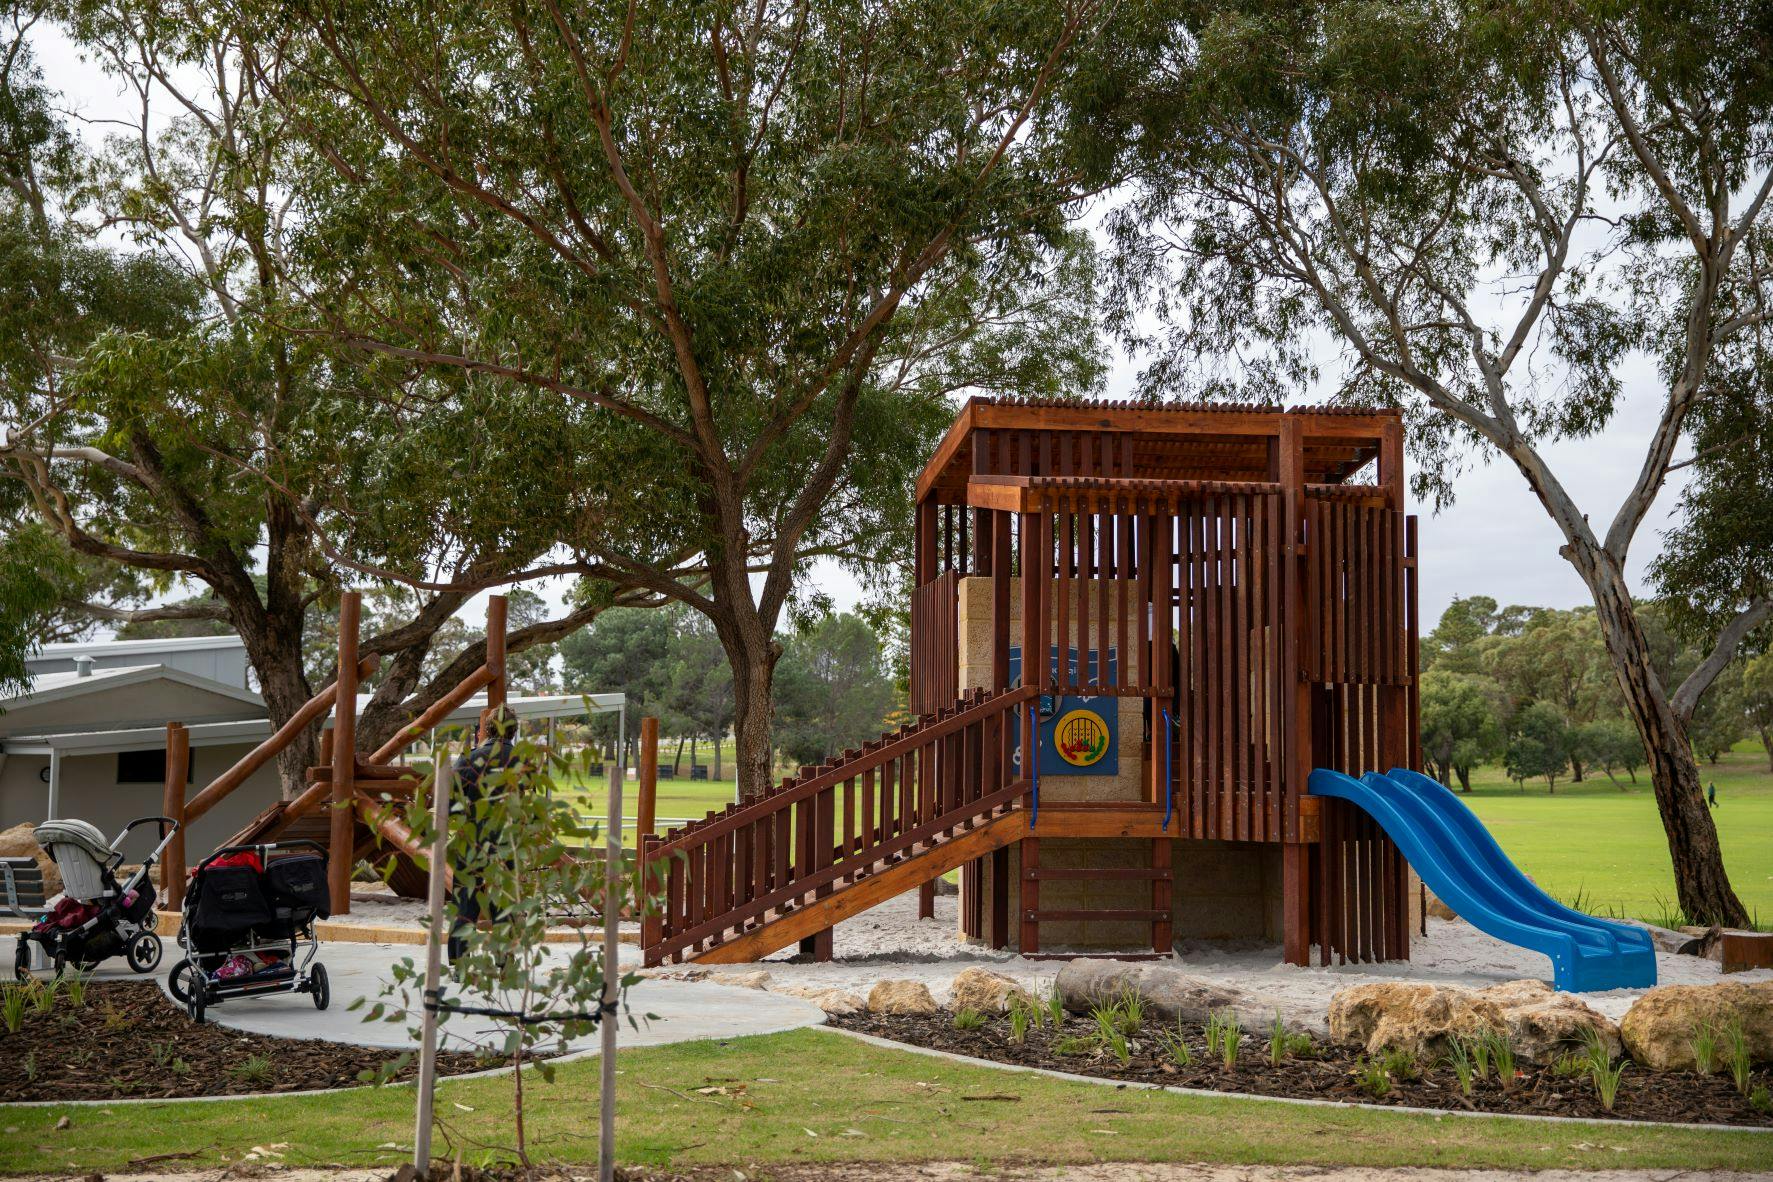 New Dick Lawrence Playground